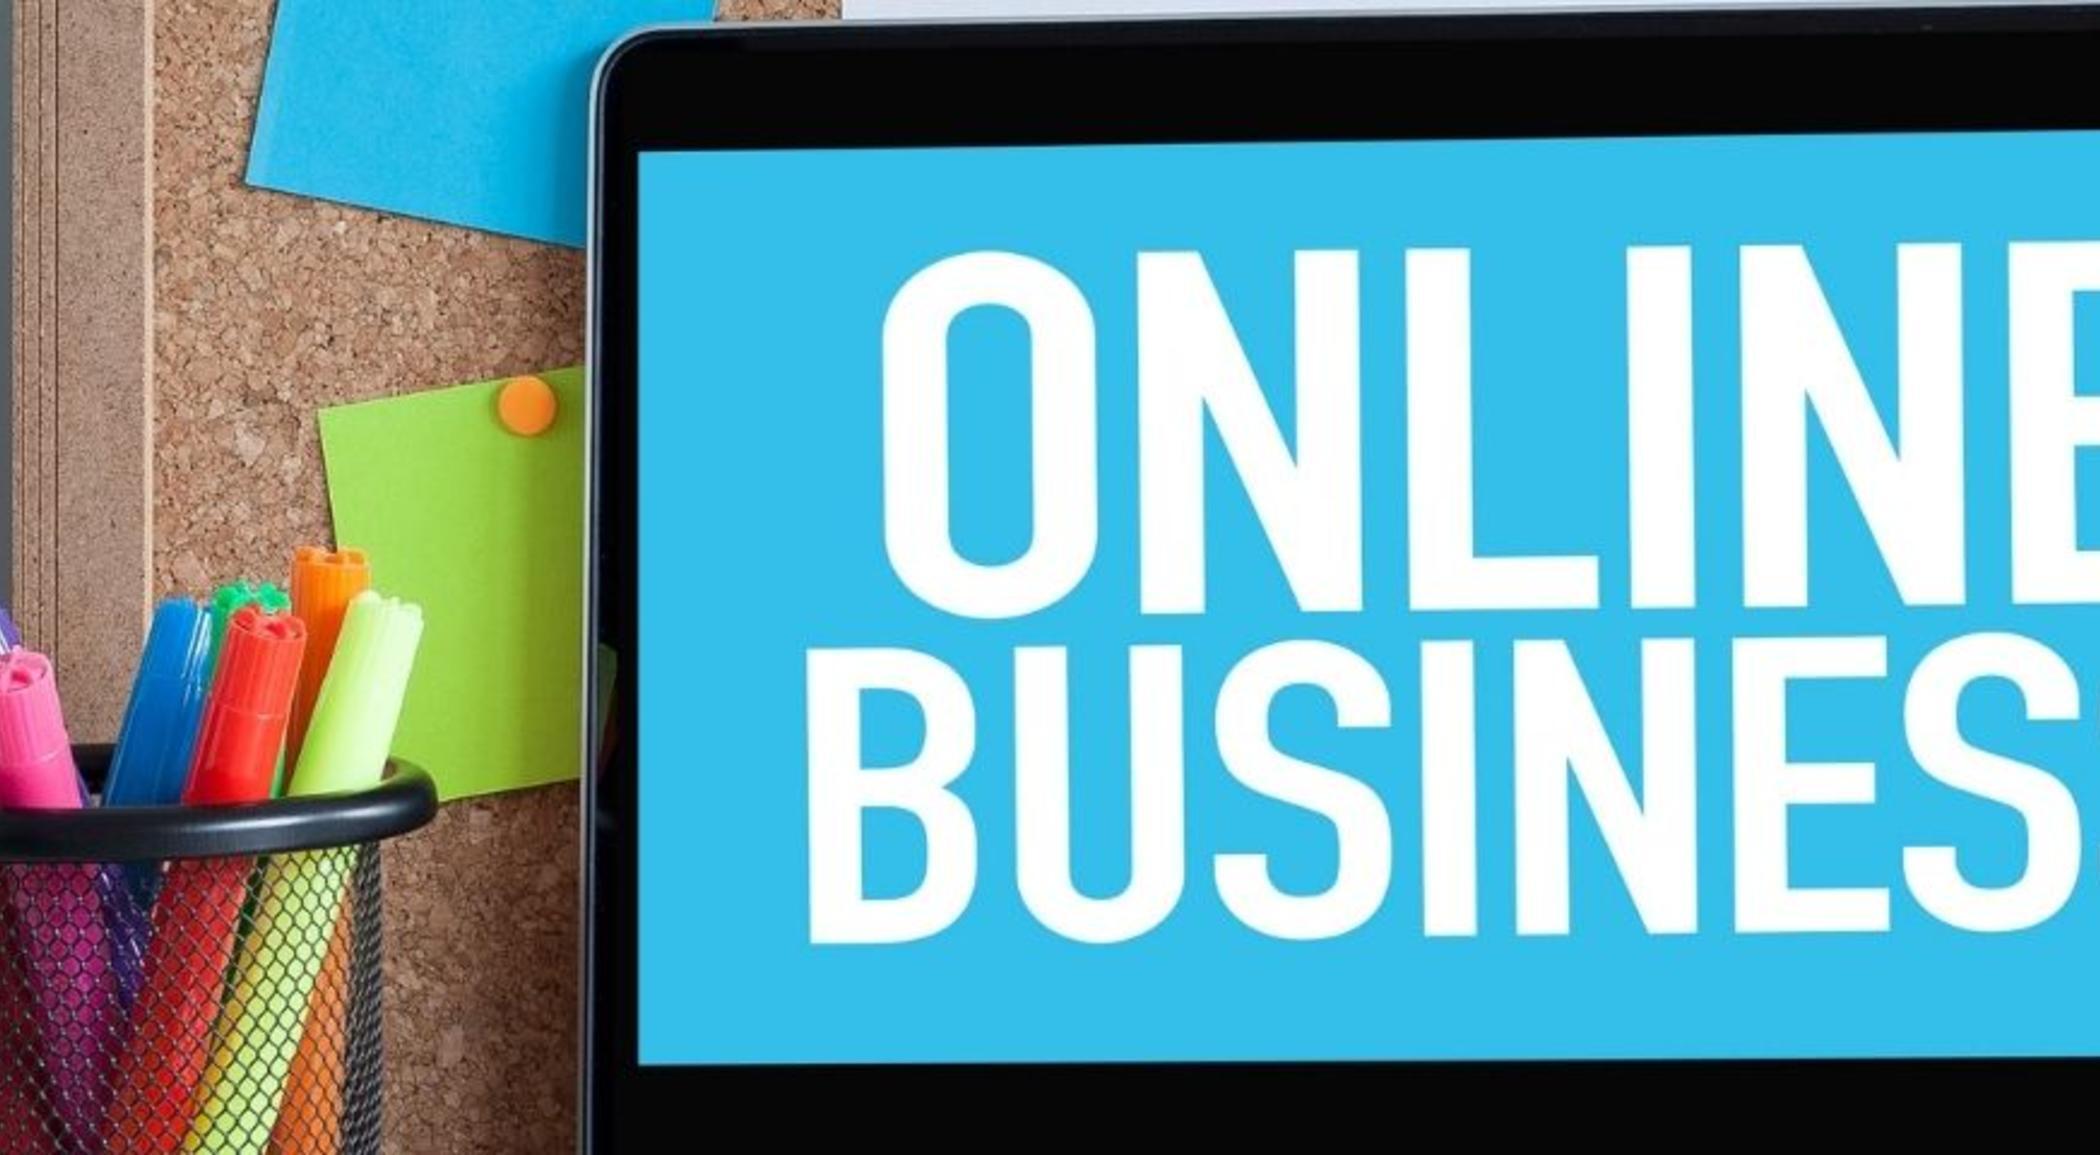 Starting Online Business for Dummies - Podcast Episode 2